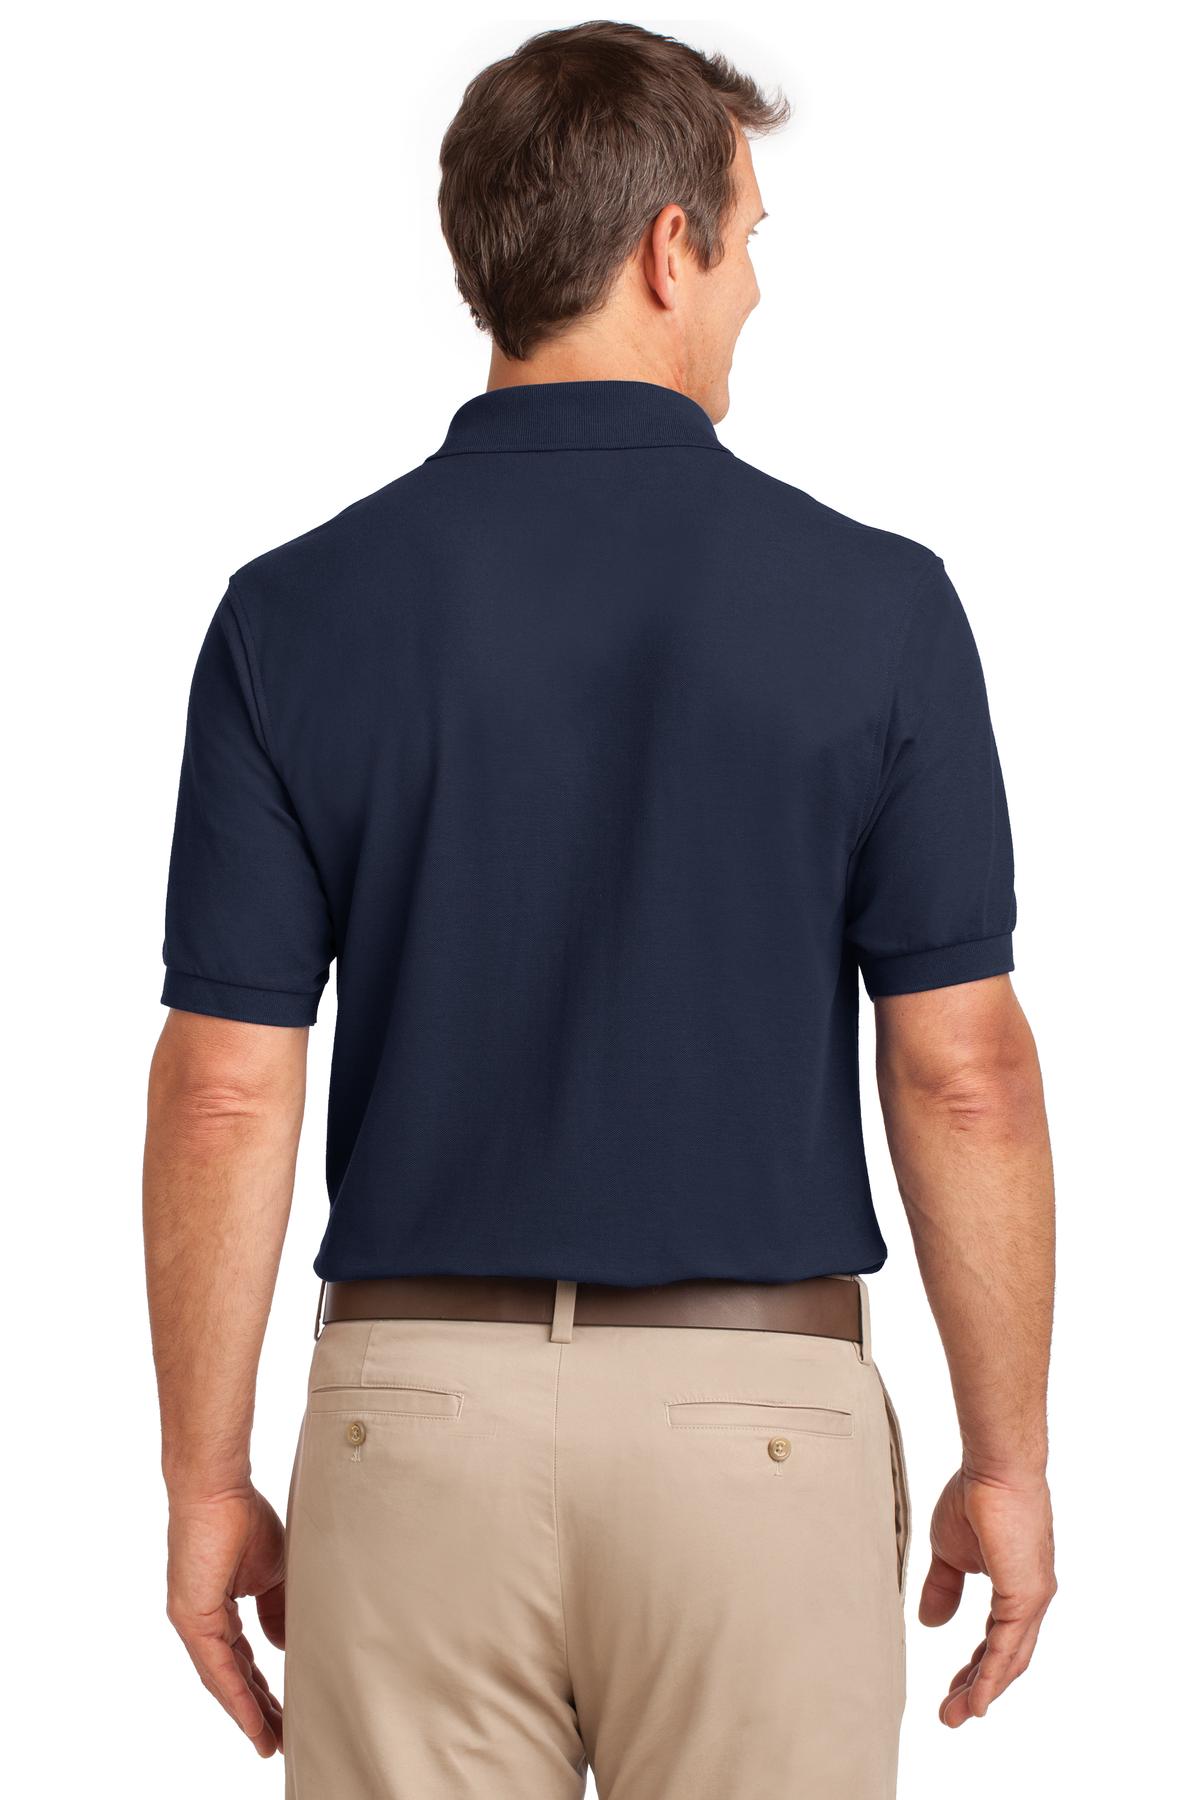 Port Authority Tall Silk Touch™ Polo with Pocket. TLK500P